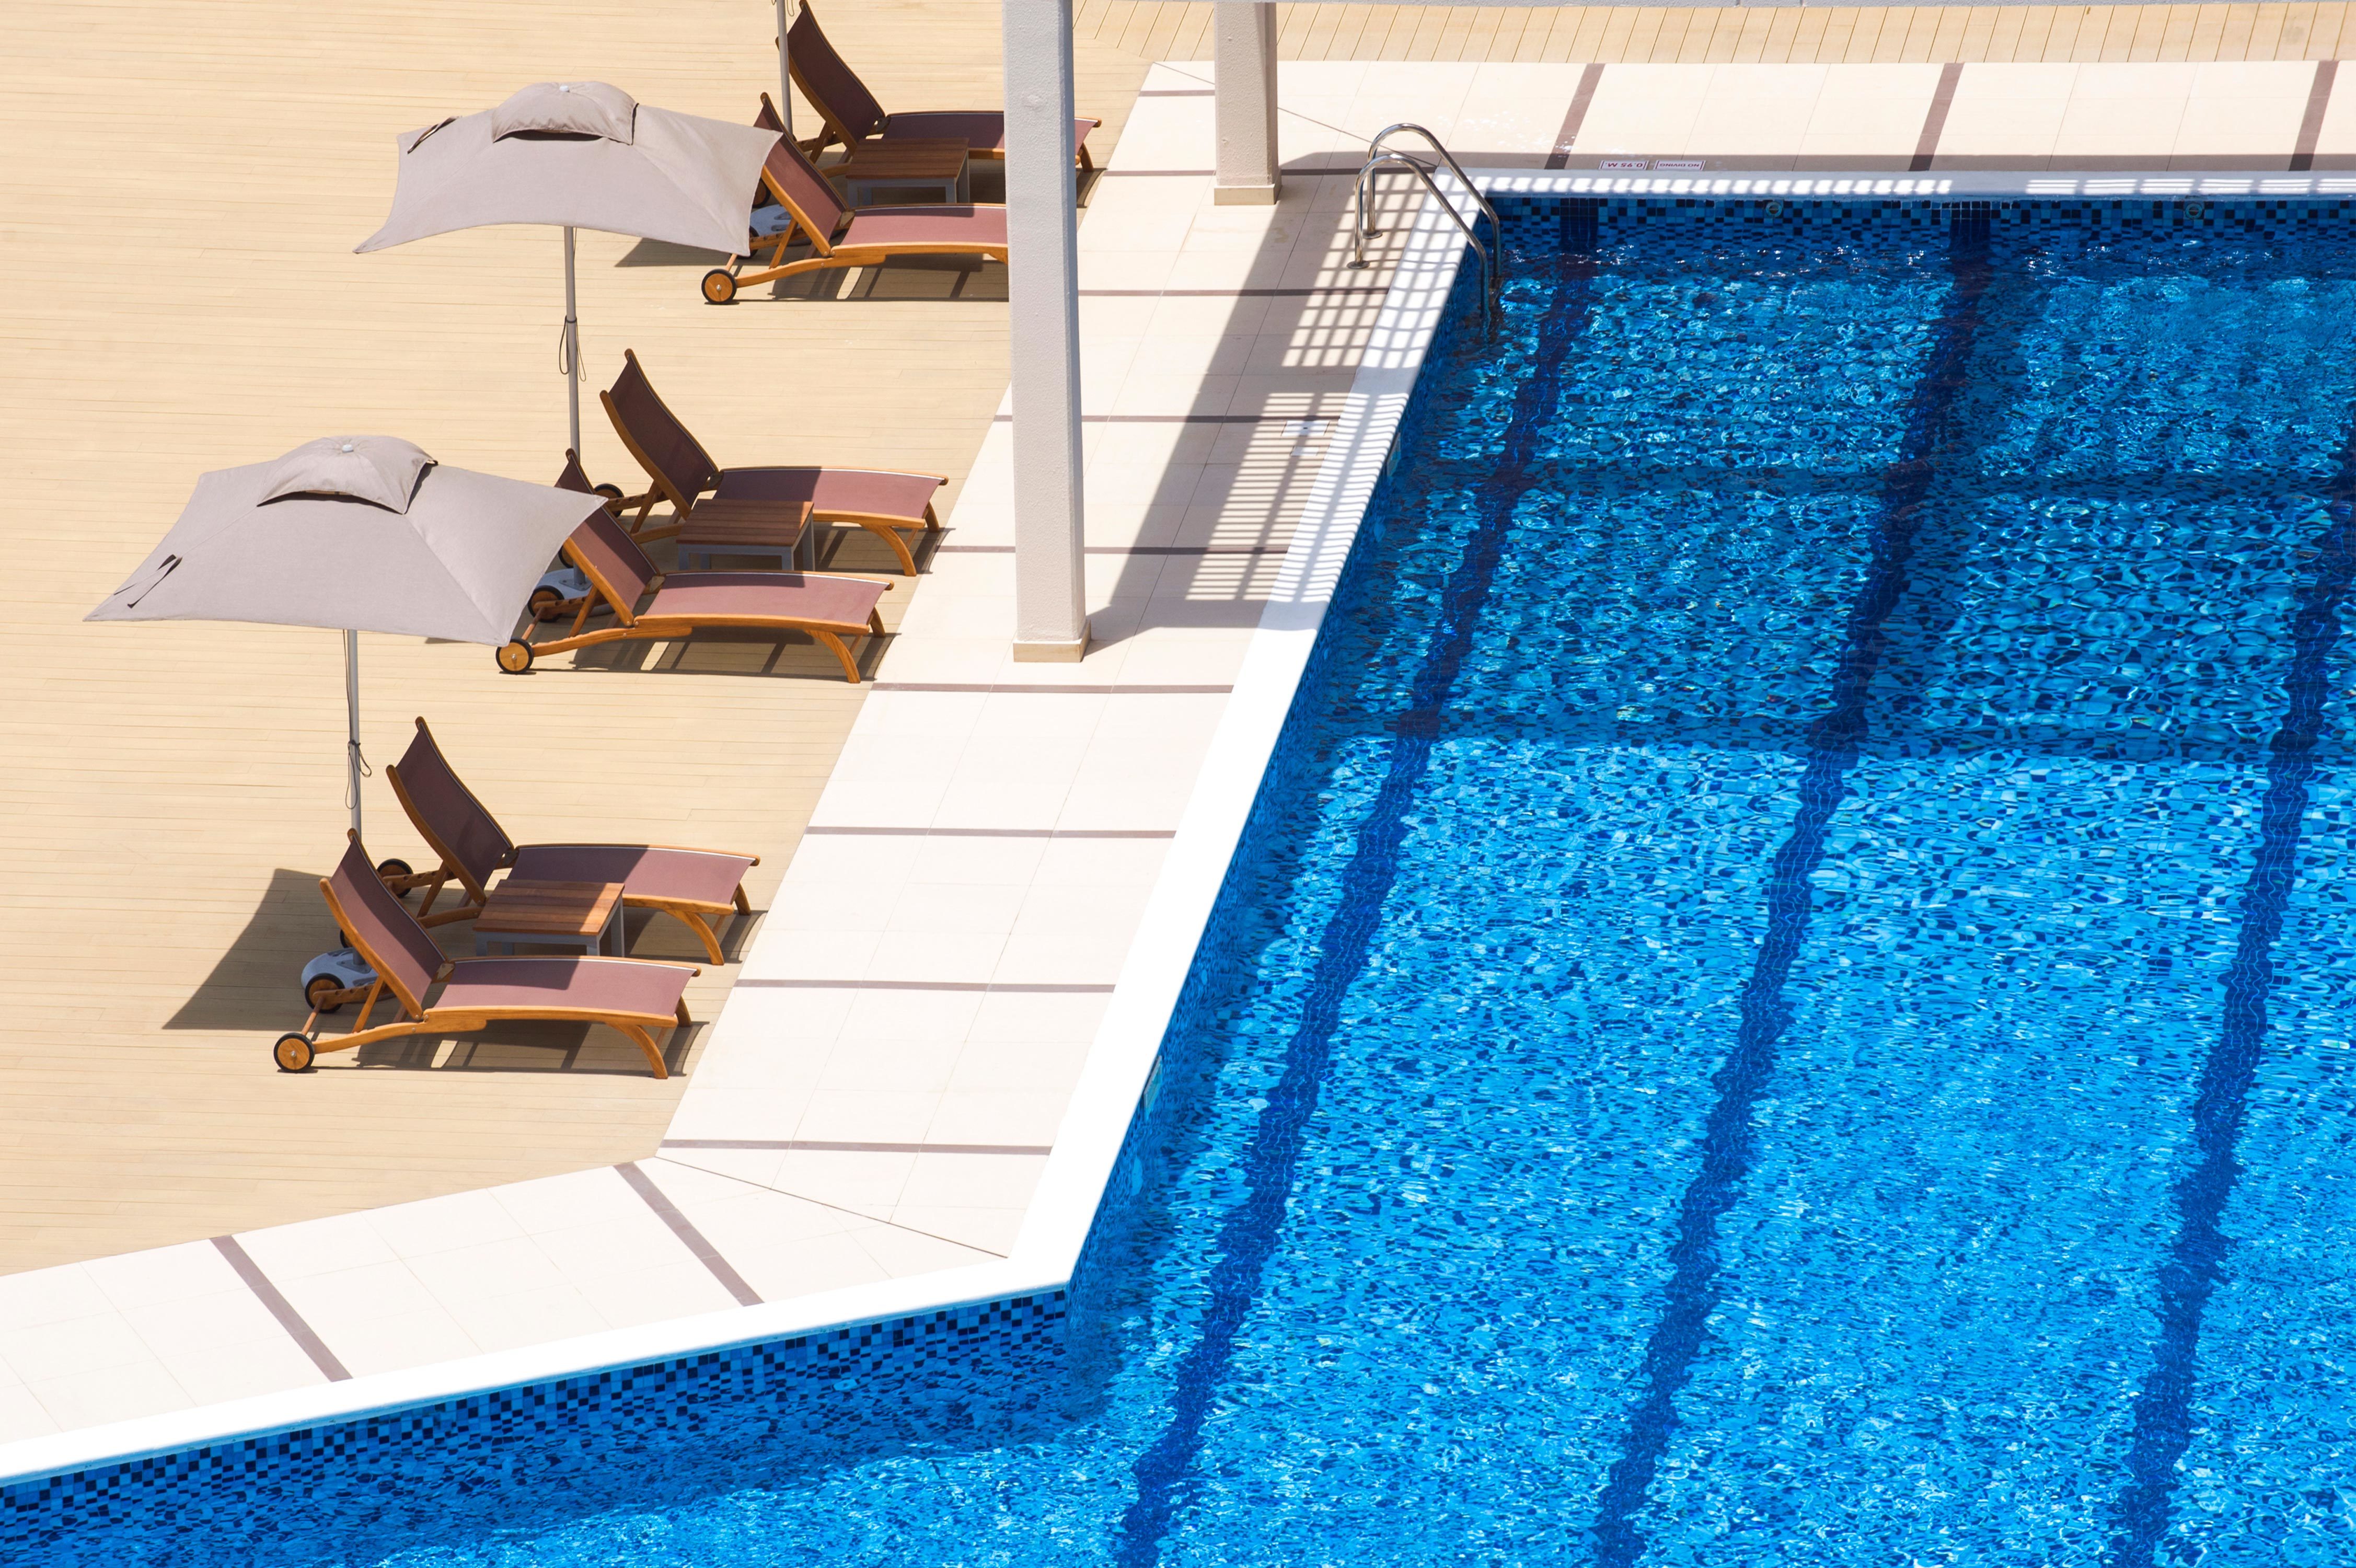 Daytime View of Loungers With Umbrellas by Outdoor Pool